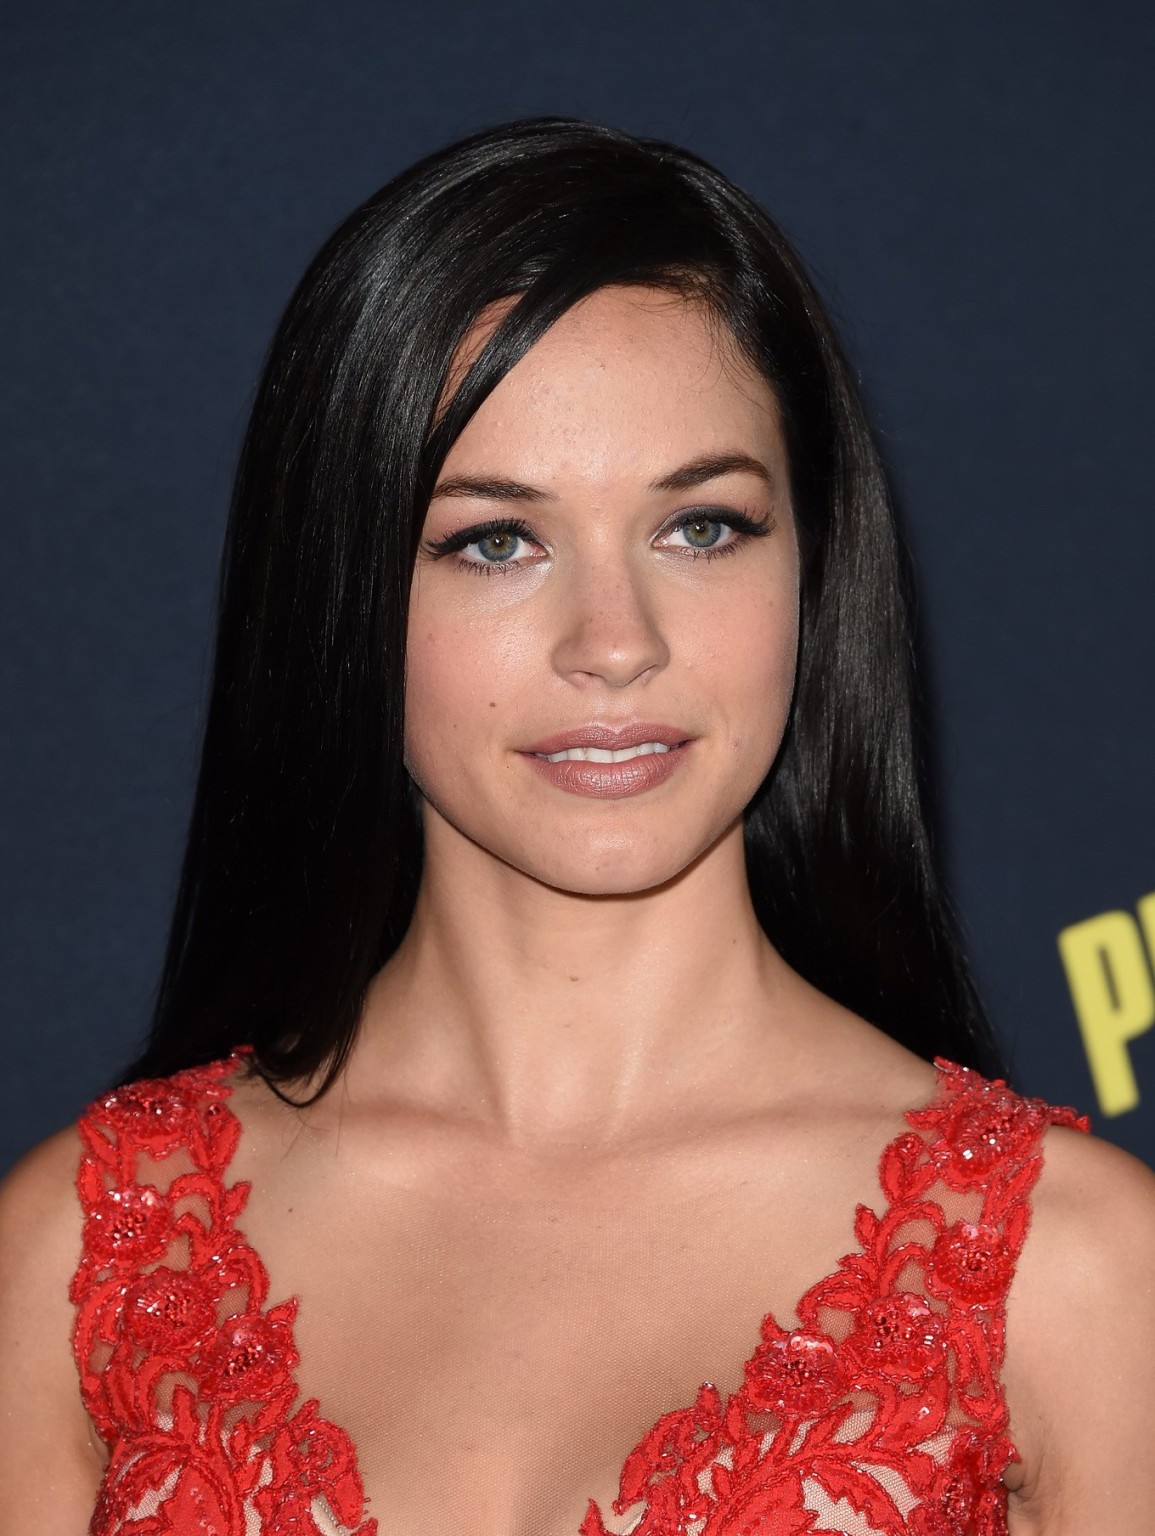 Alexis Knapp Showing Big Cleavage In Hot Red Dress At The Pitch Perfect 2 Premie Porn Pictures